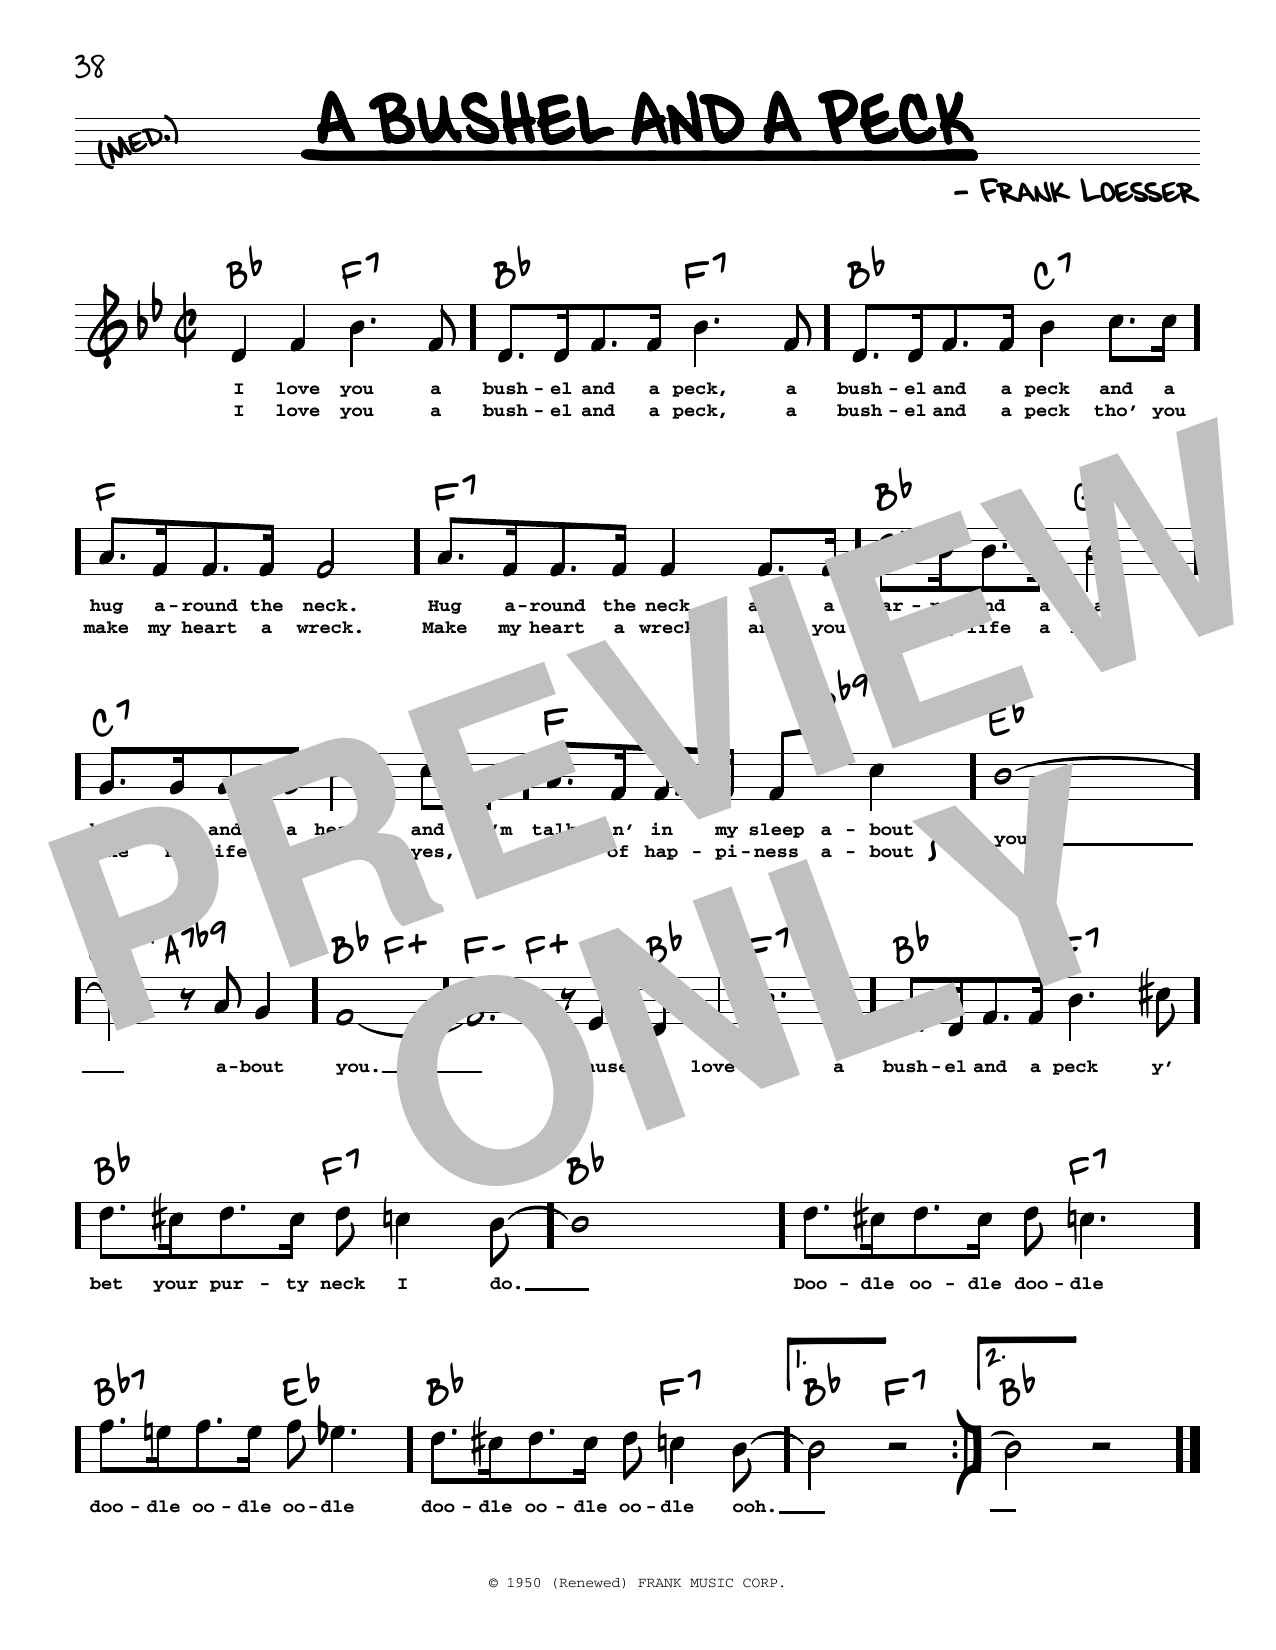 Download Frank Loesser A Bushel And A Peck (High Voice) (from Sheet Music